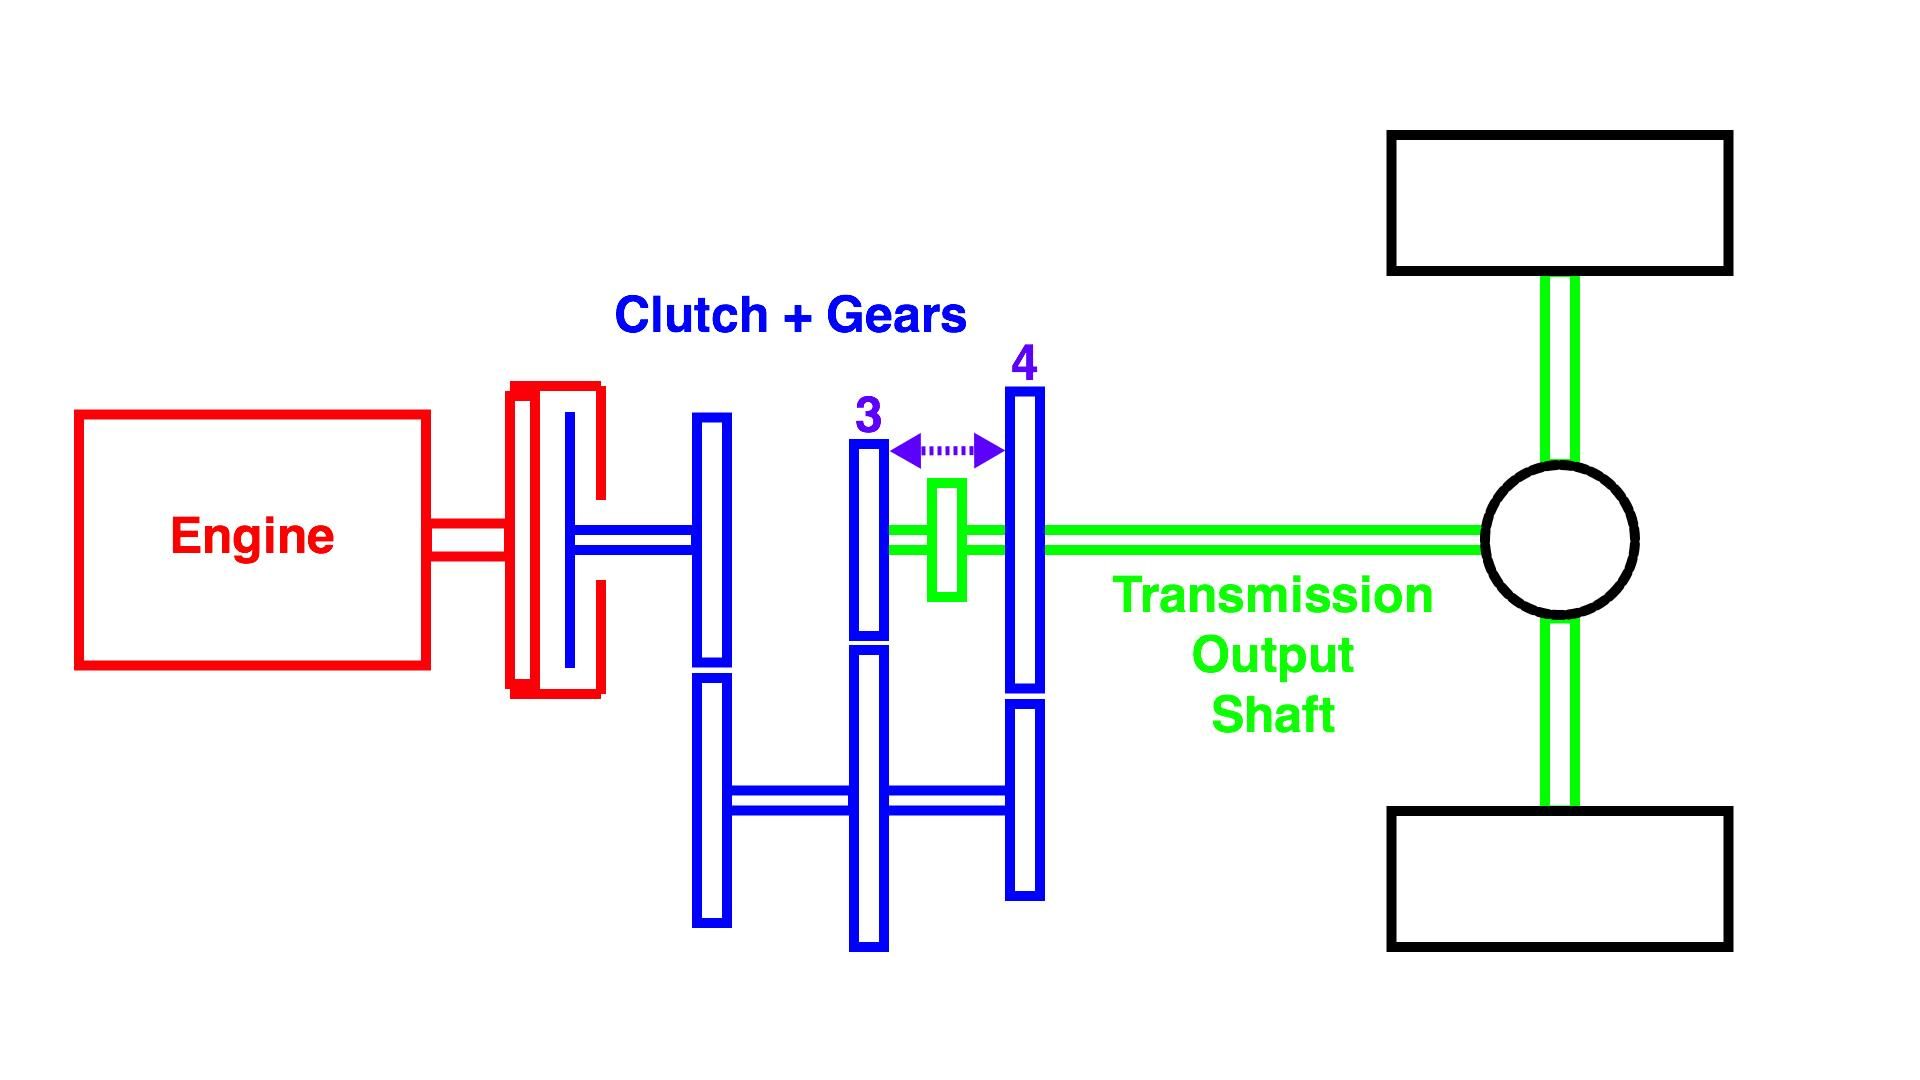 How Dual-clutch Transmissions Work